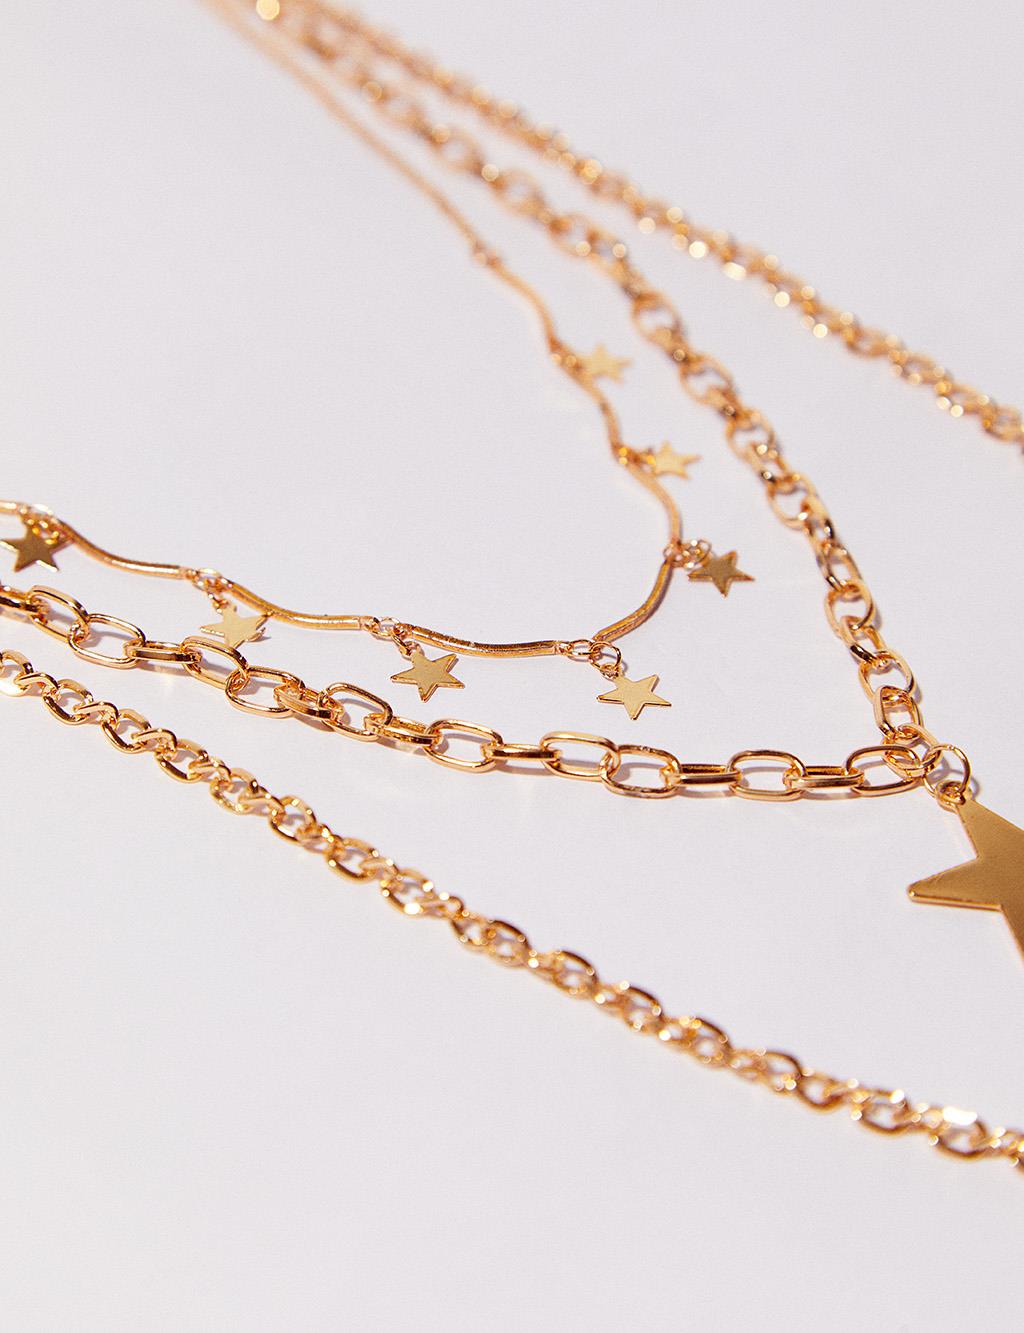 Star Figured Triple Chain Necklace Gold